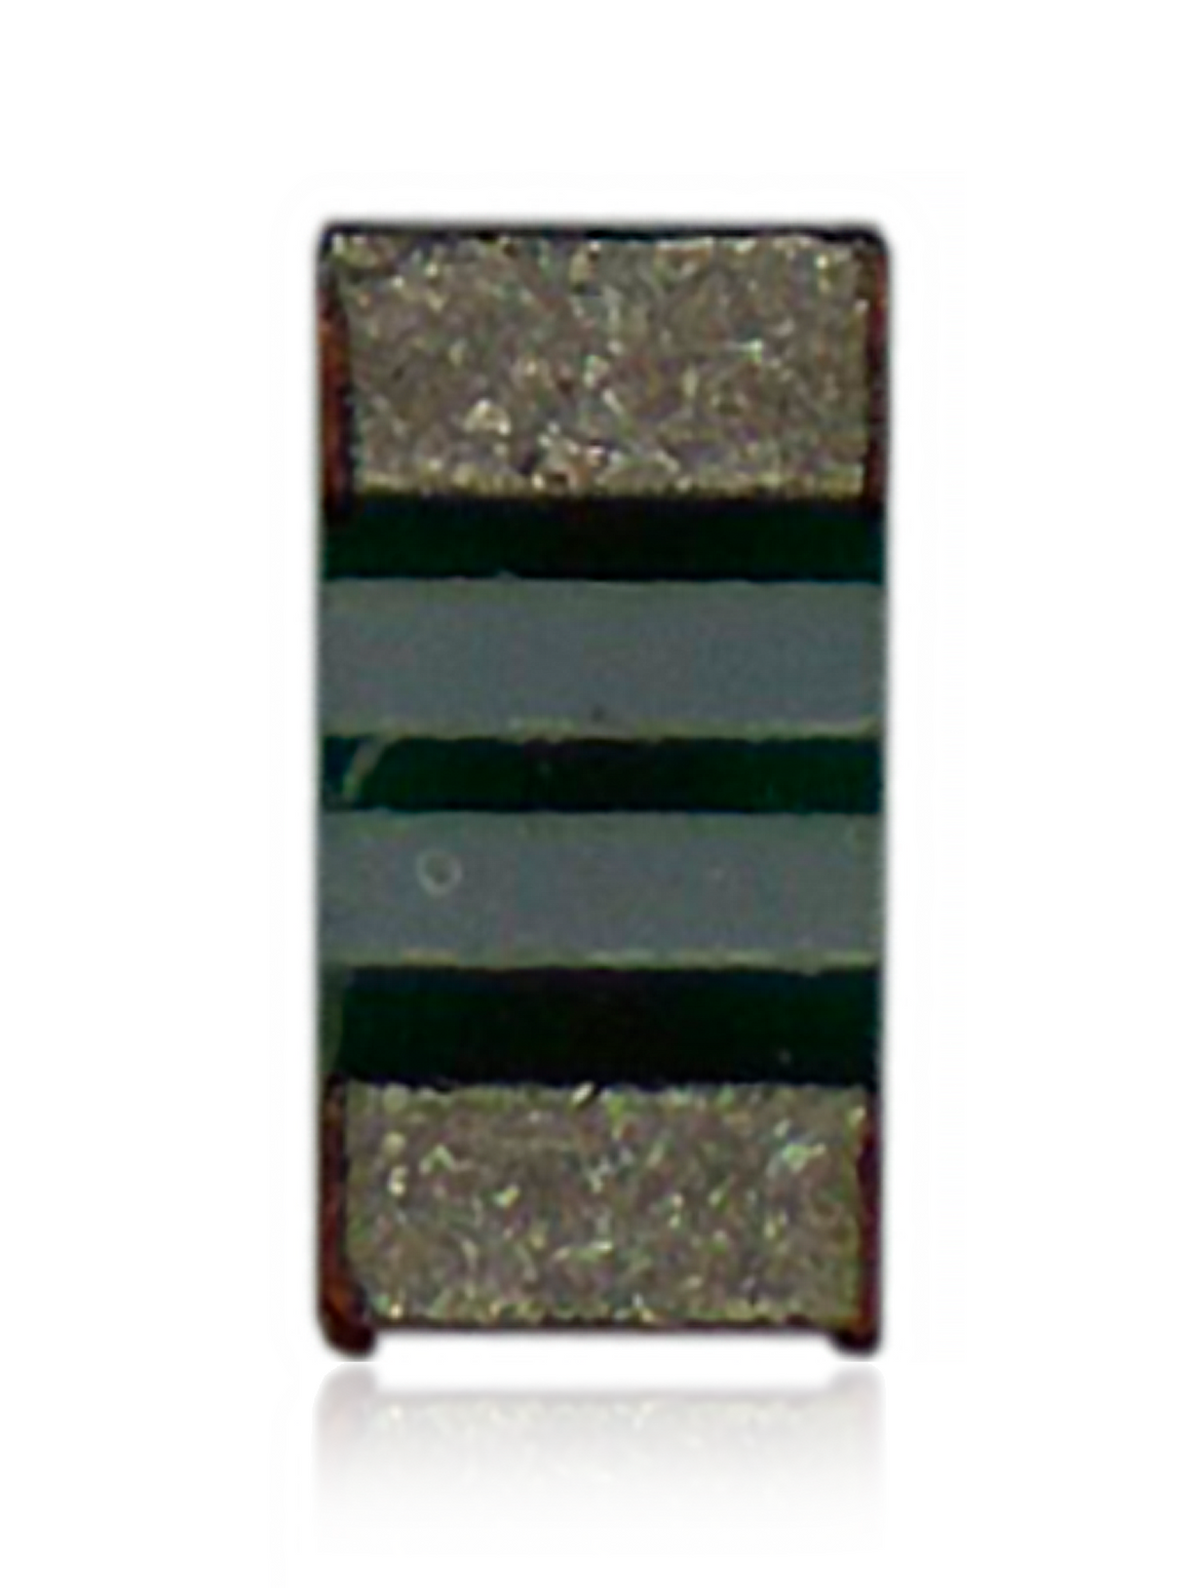 NON-RESETTABLE SMD SURFACE MOUNT FUSE IC COMPATIBLE WITH MACBOOKS (PANASONIC: ERBRD3R00X / ERBRE4R00V: 32V DC / 4A)